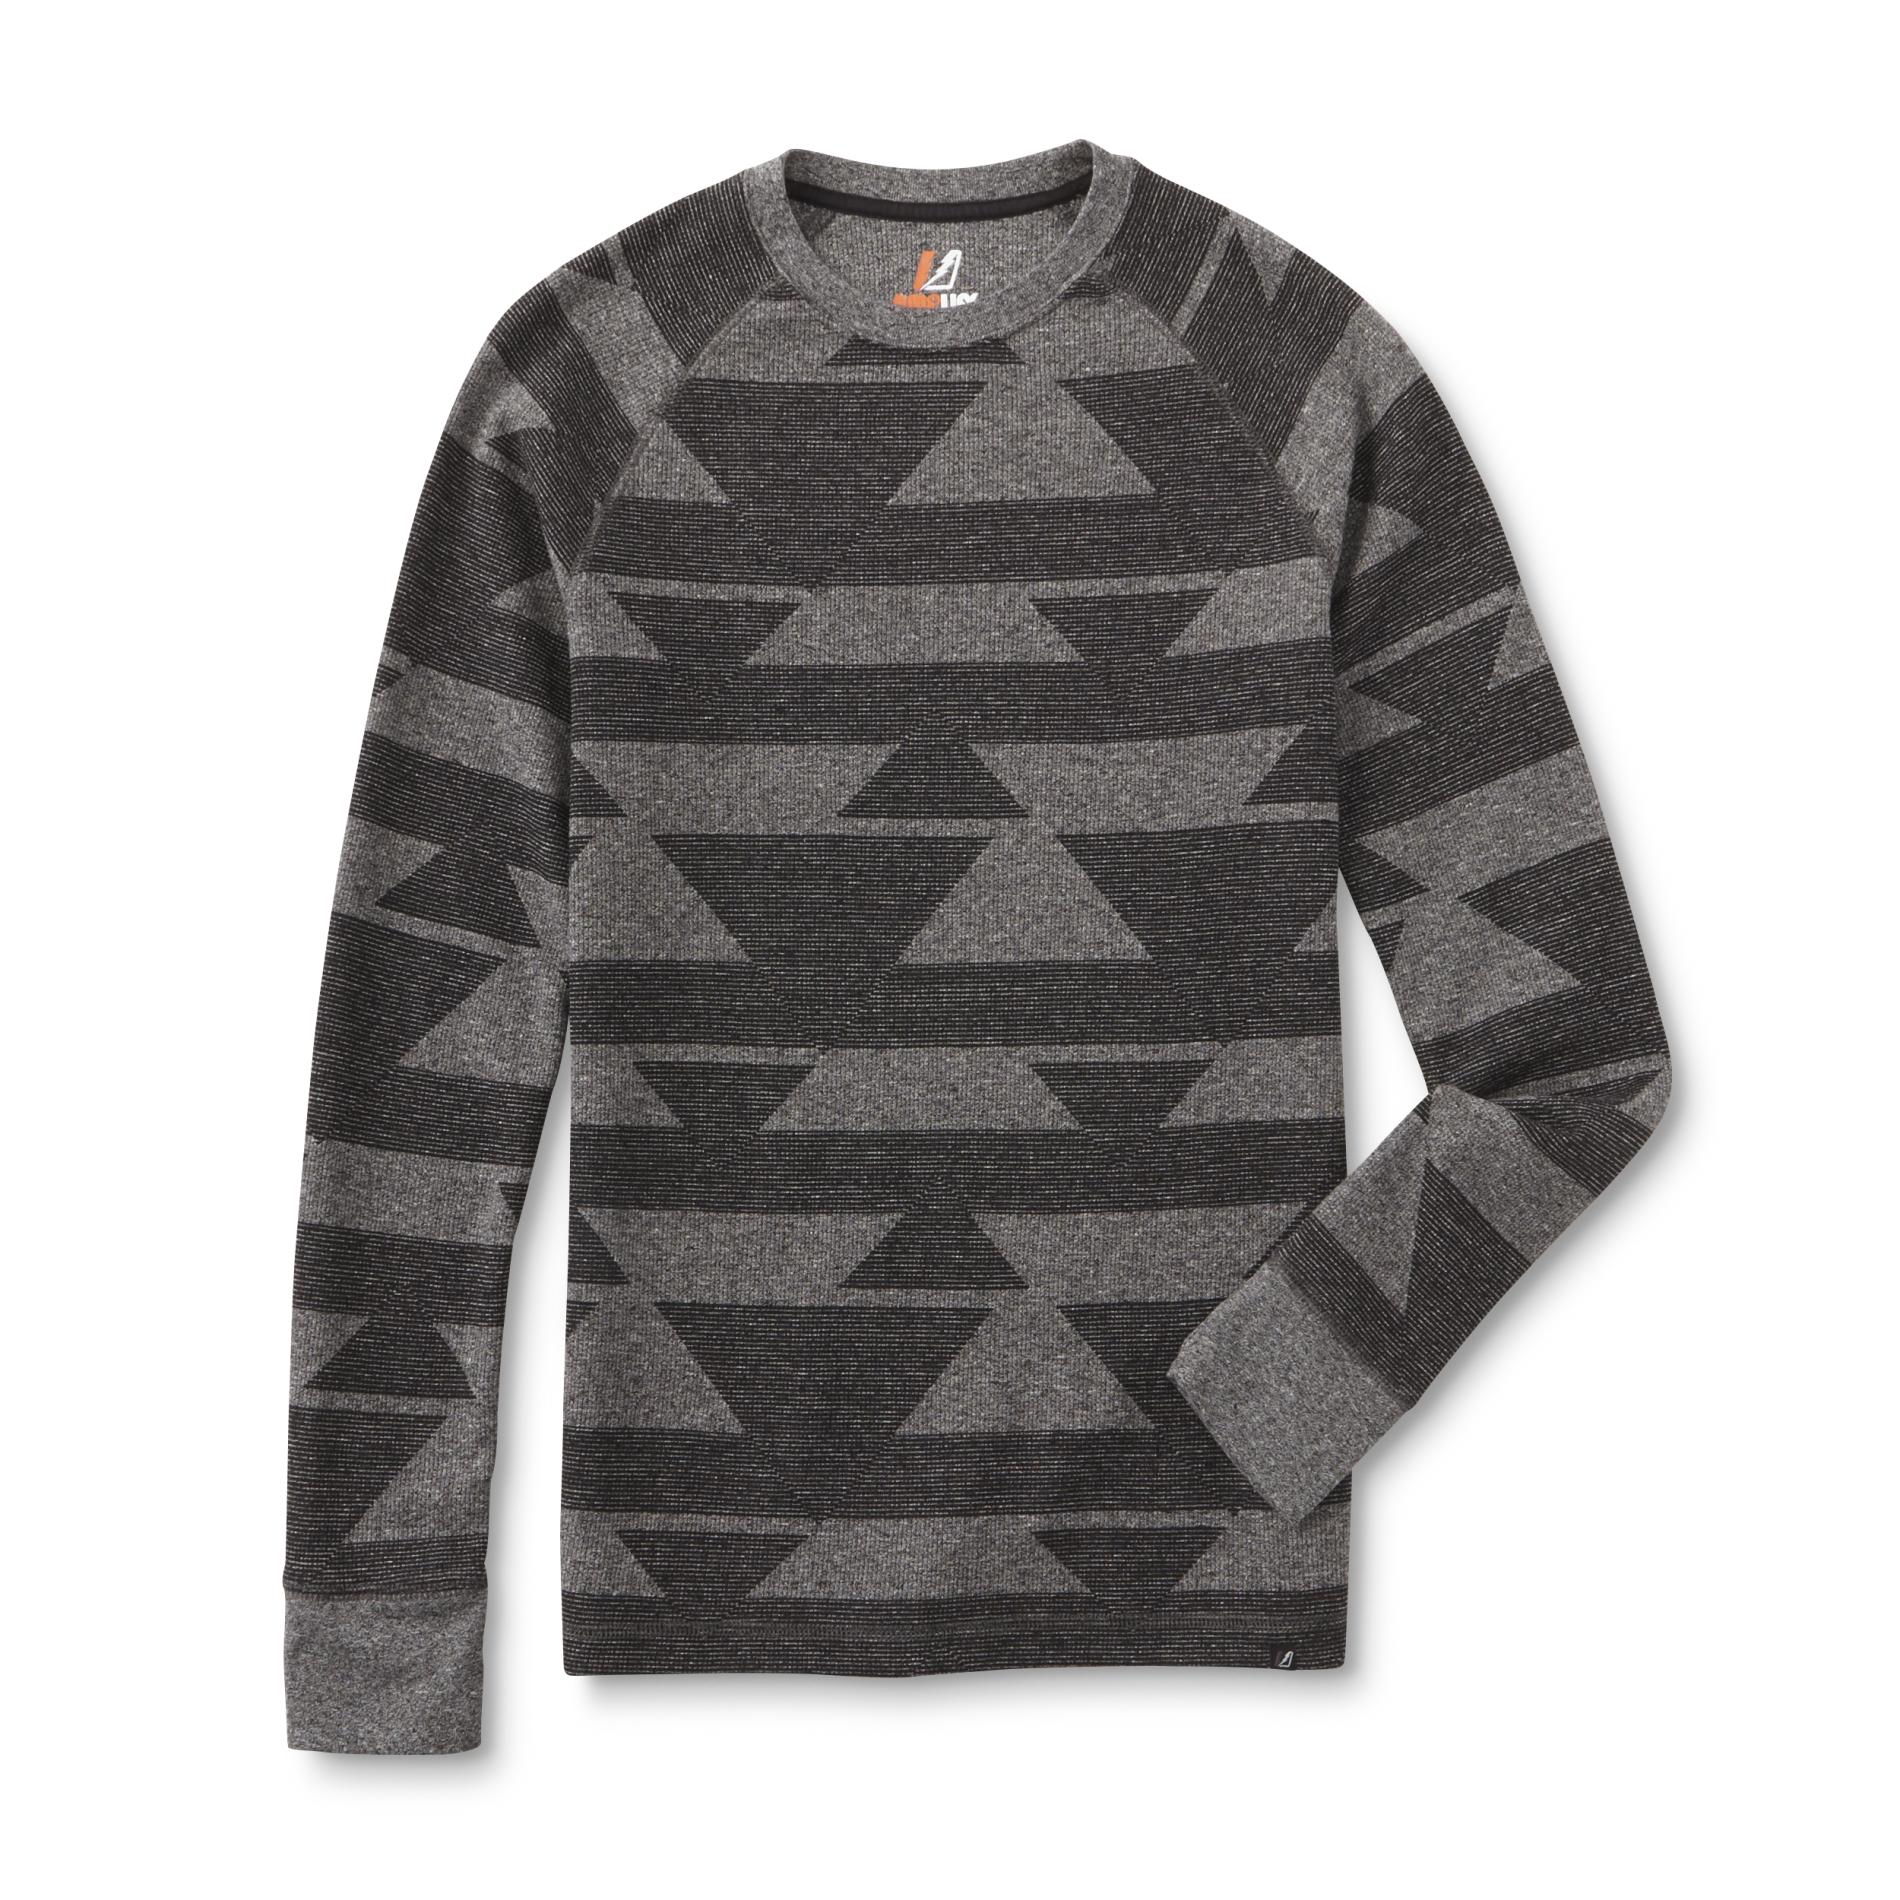 Amplify Young Men's Thermal Shirt - Tribal